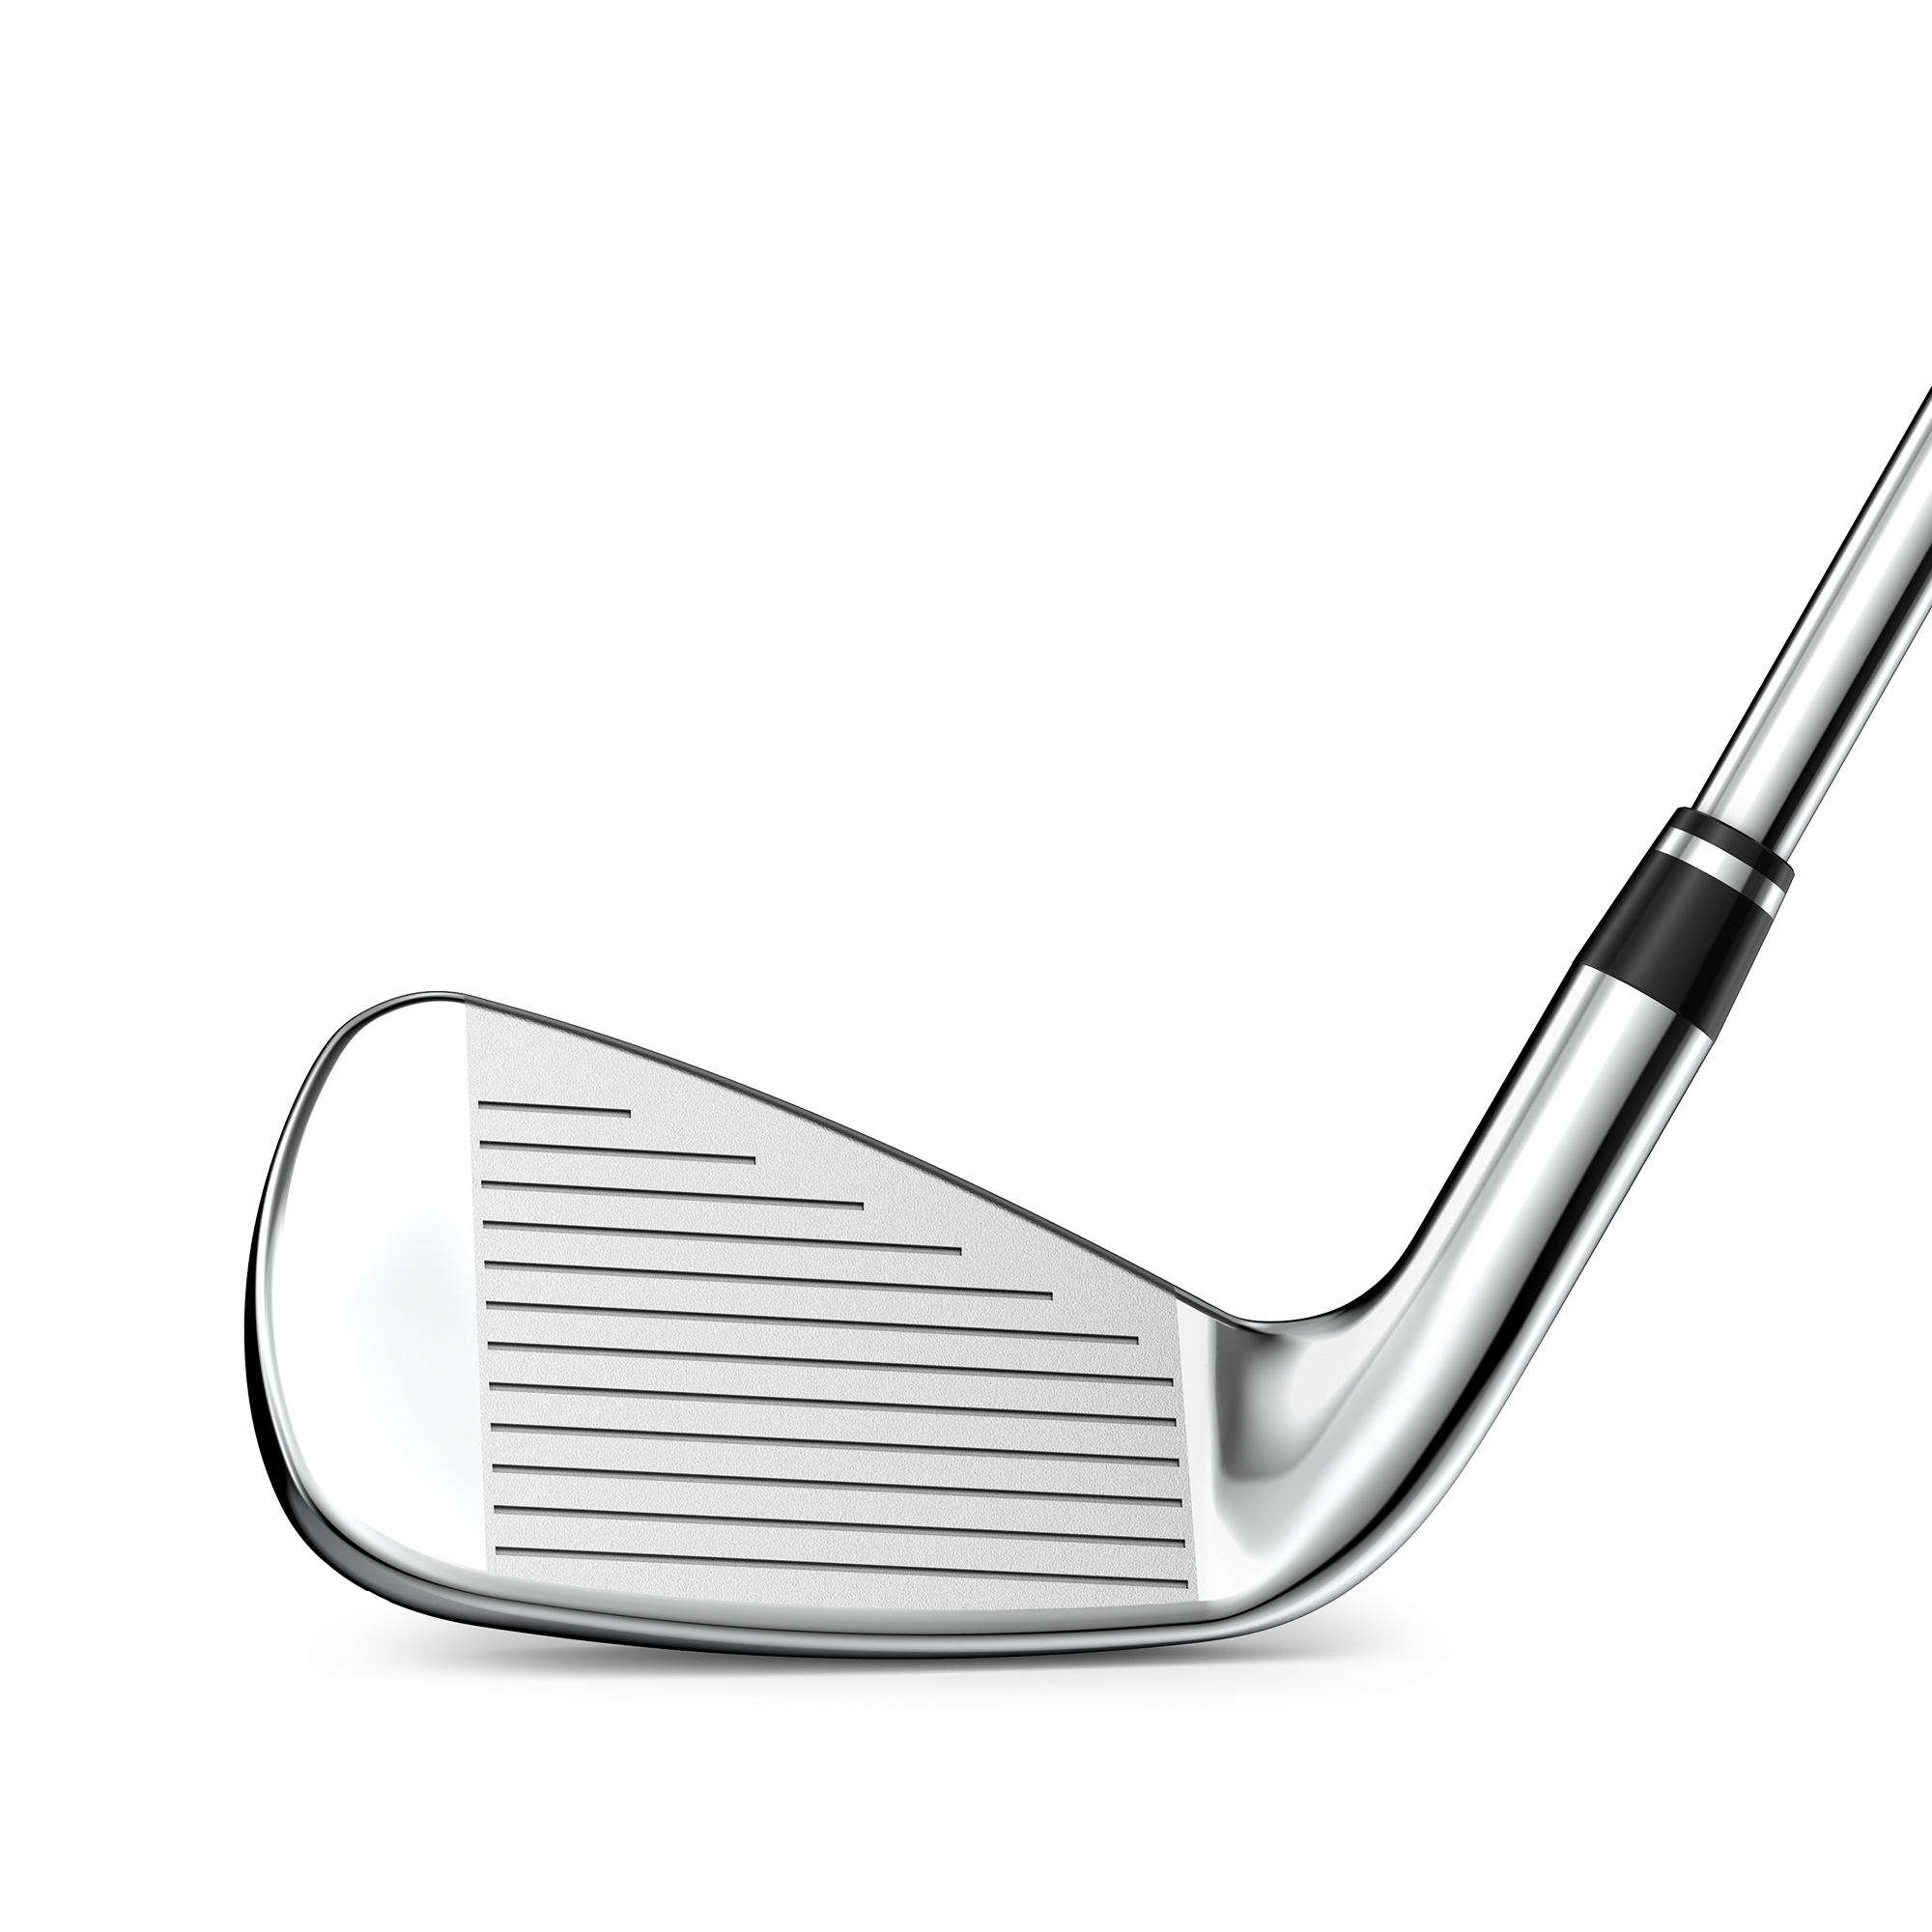 Launch Pad 2 Irons w/ Steel Shafts